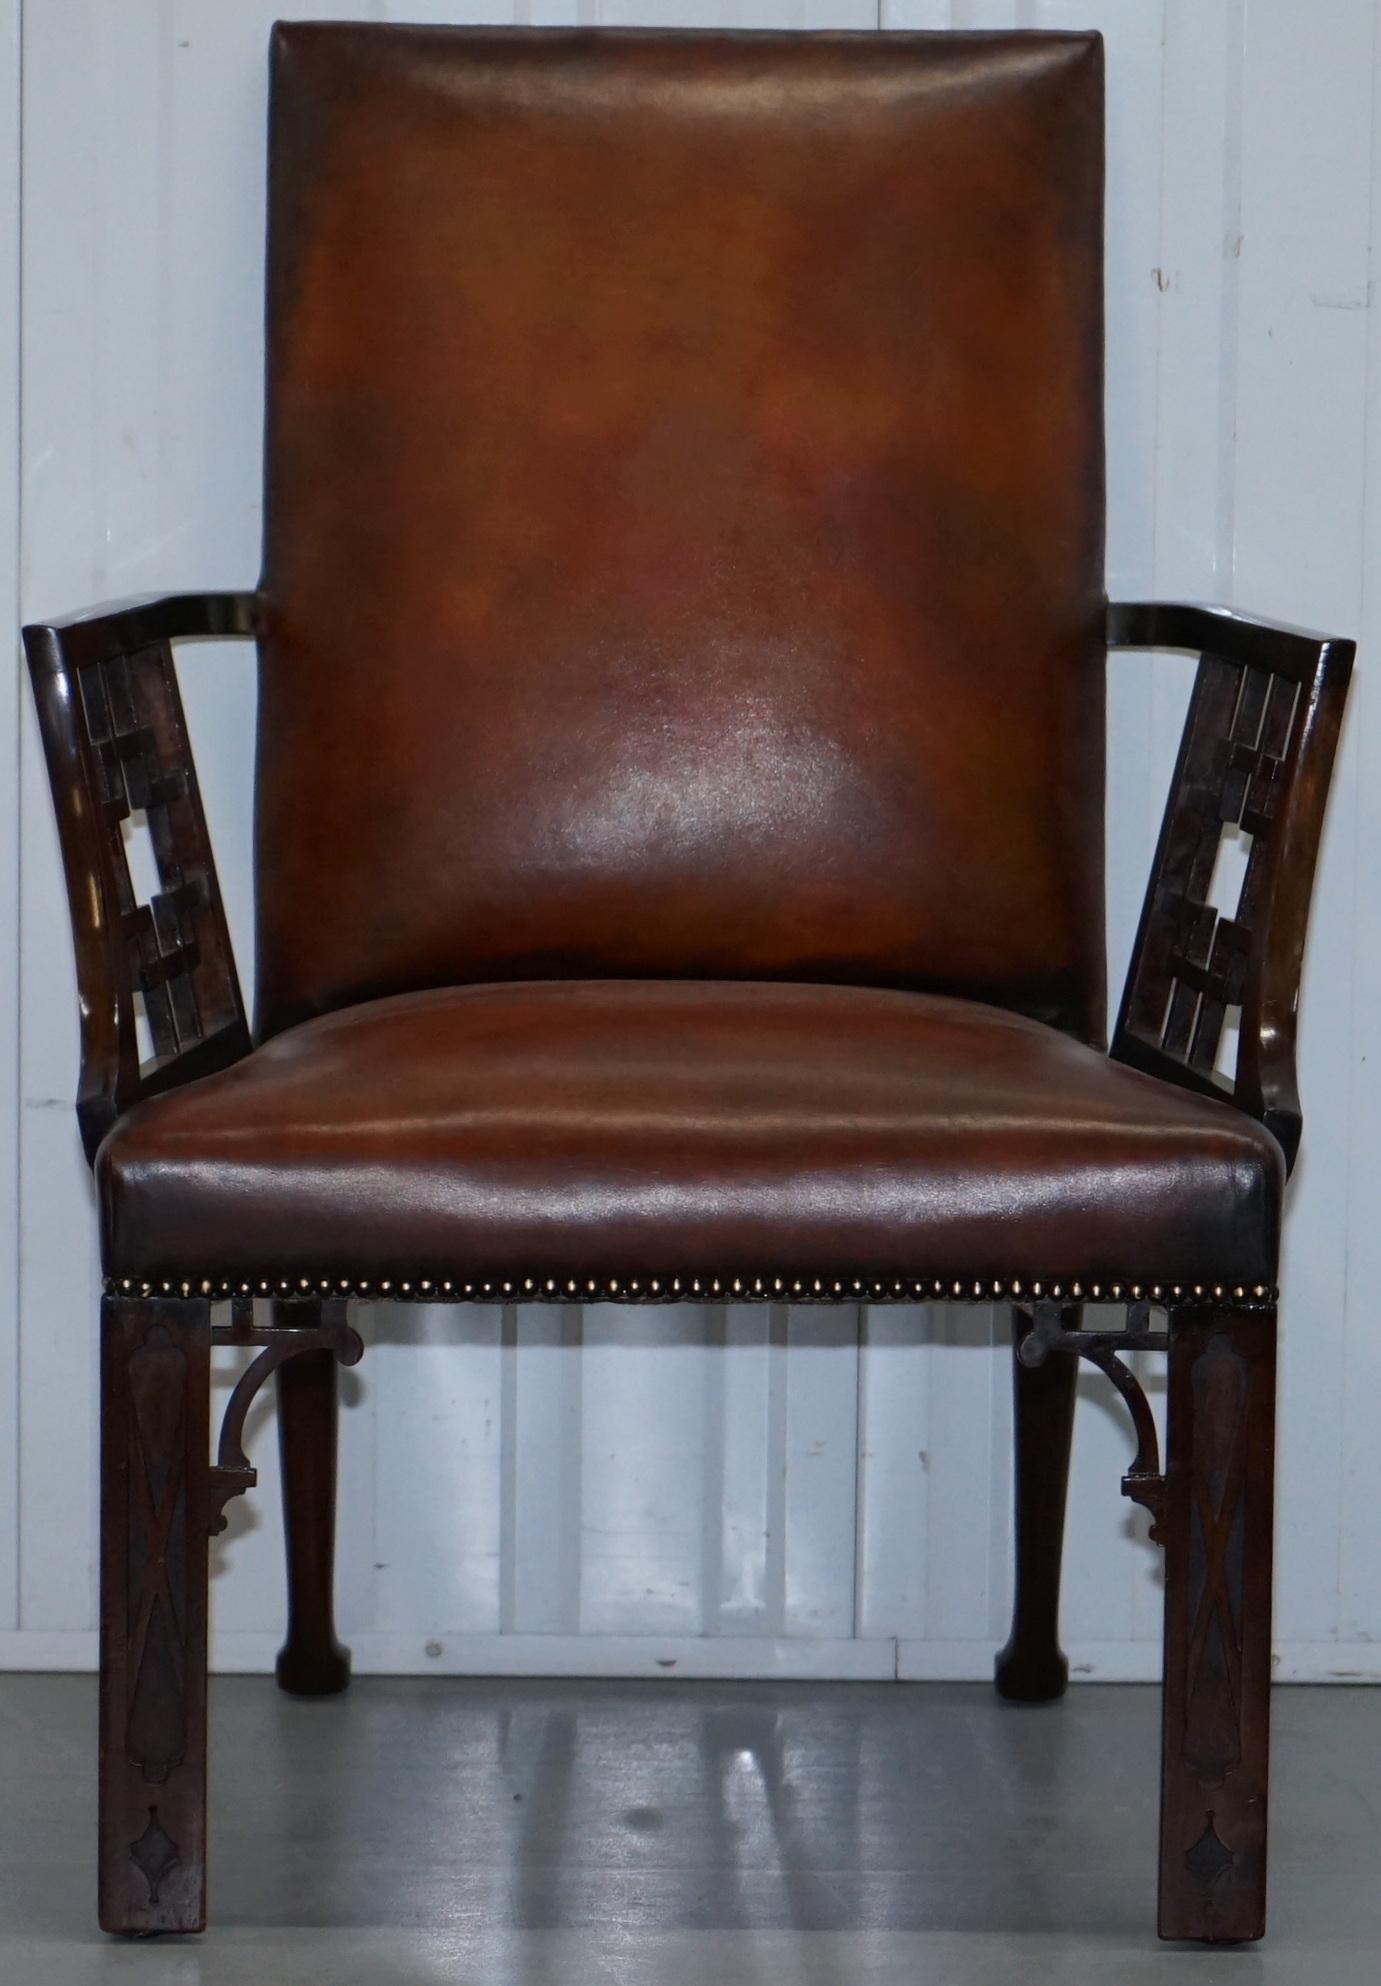 We are delighted to offer for sale this lovely circa 1830 in the manner of Chinese Chippendale fully restored brown leather hand dyed armchair

A fantastic looking and well made piece, the chair has been fully restored to include being stripped